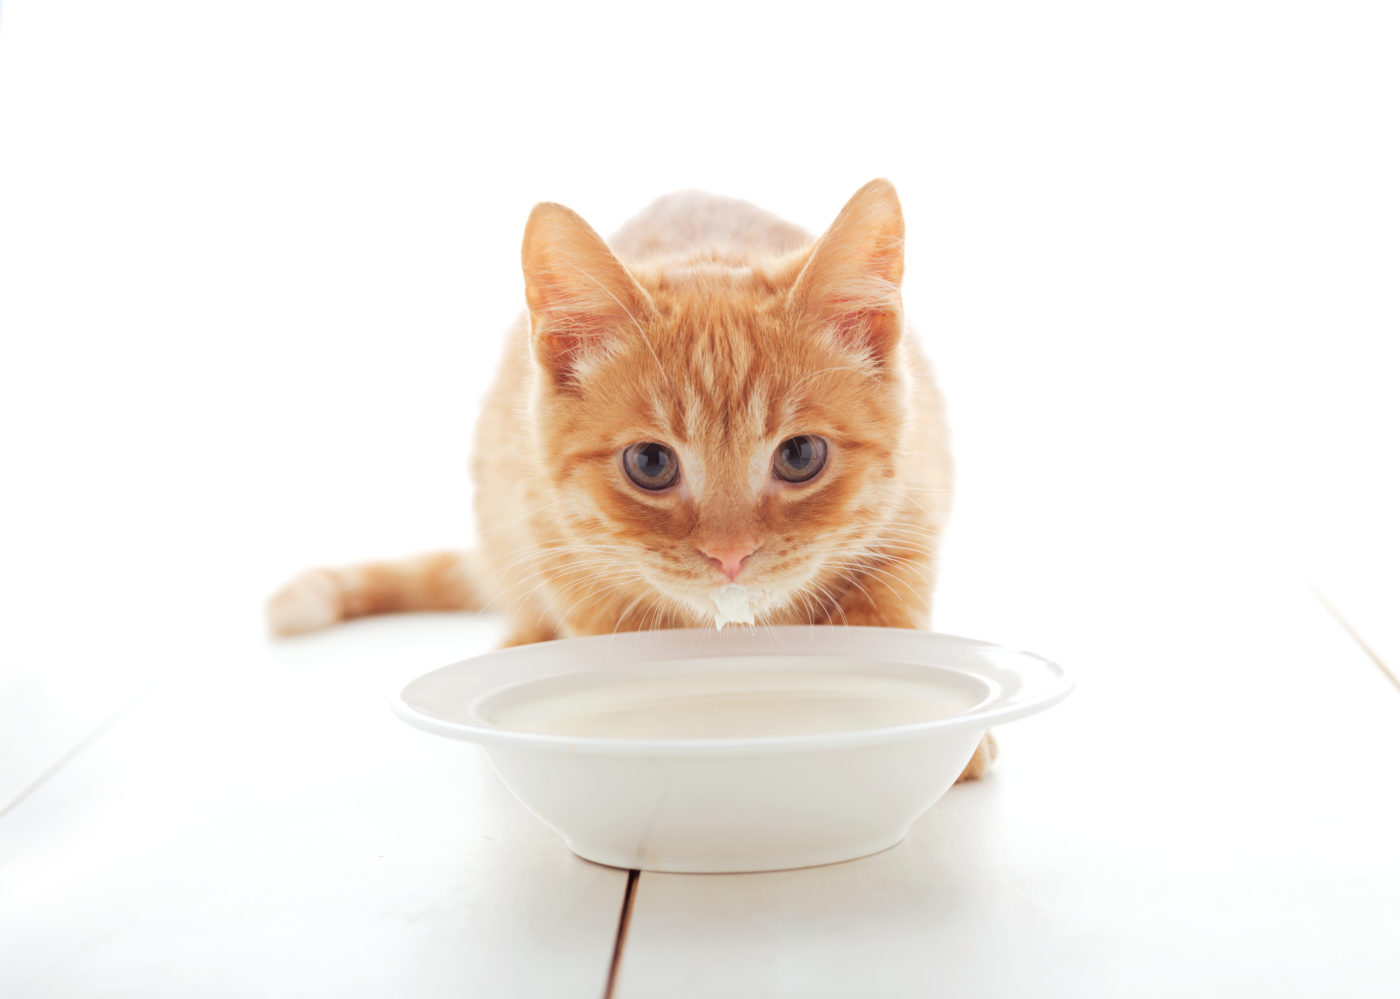 Some Of The Best Options Of Food That You Can Feed To Your Stray Cats